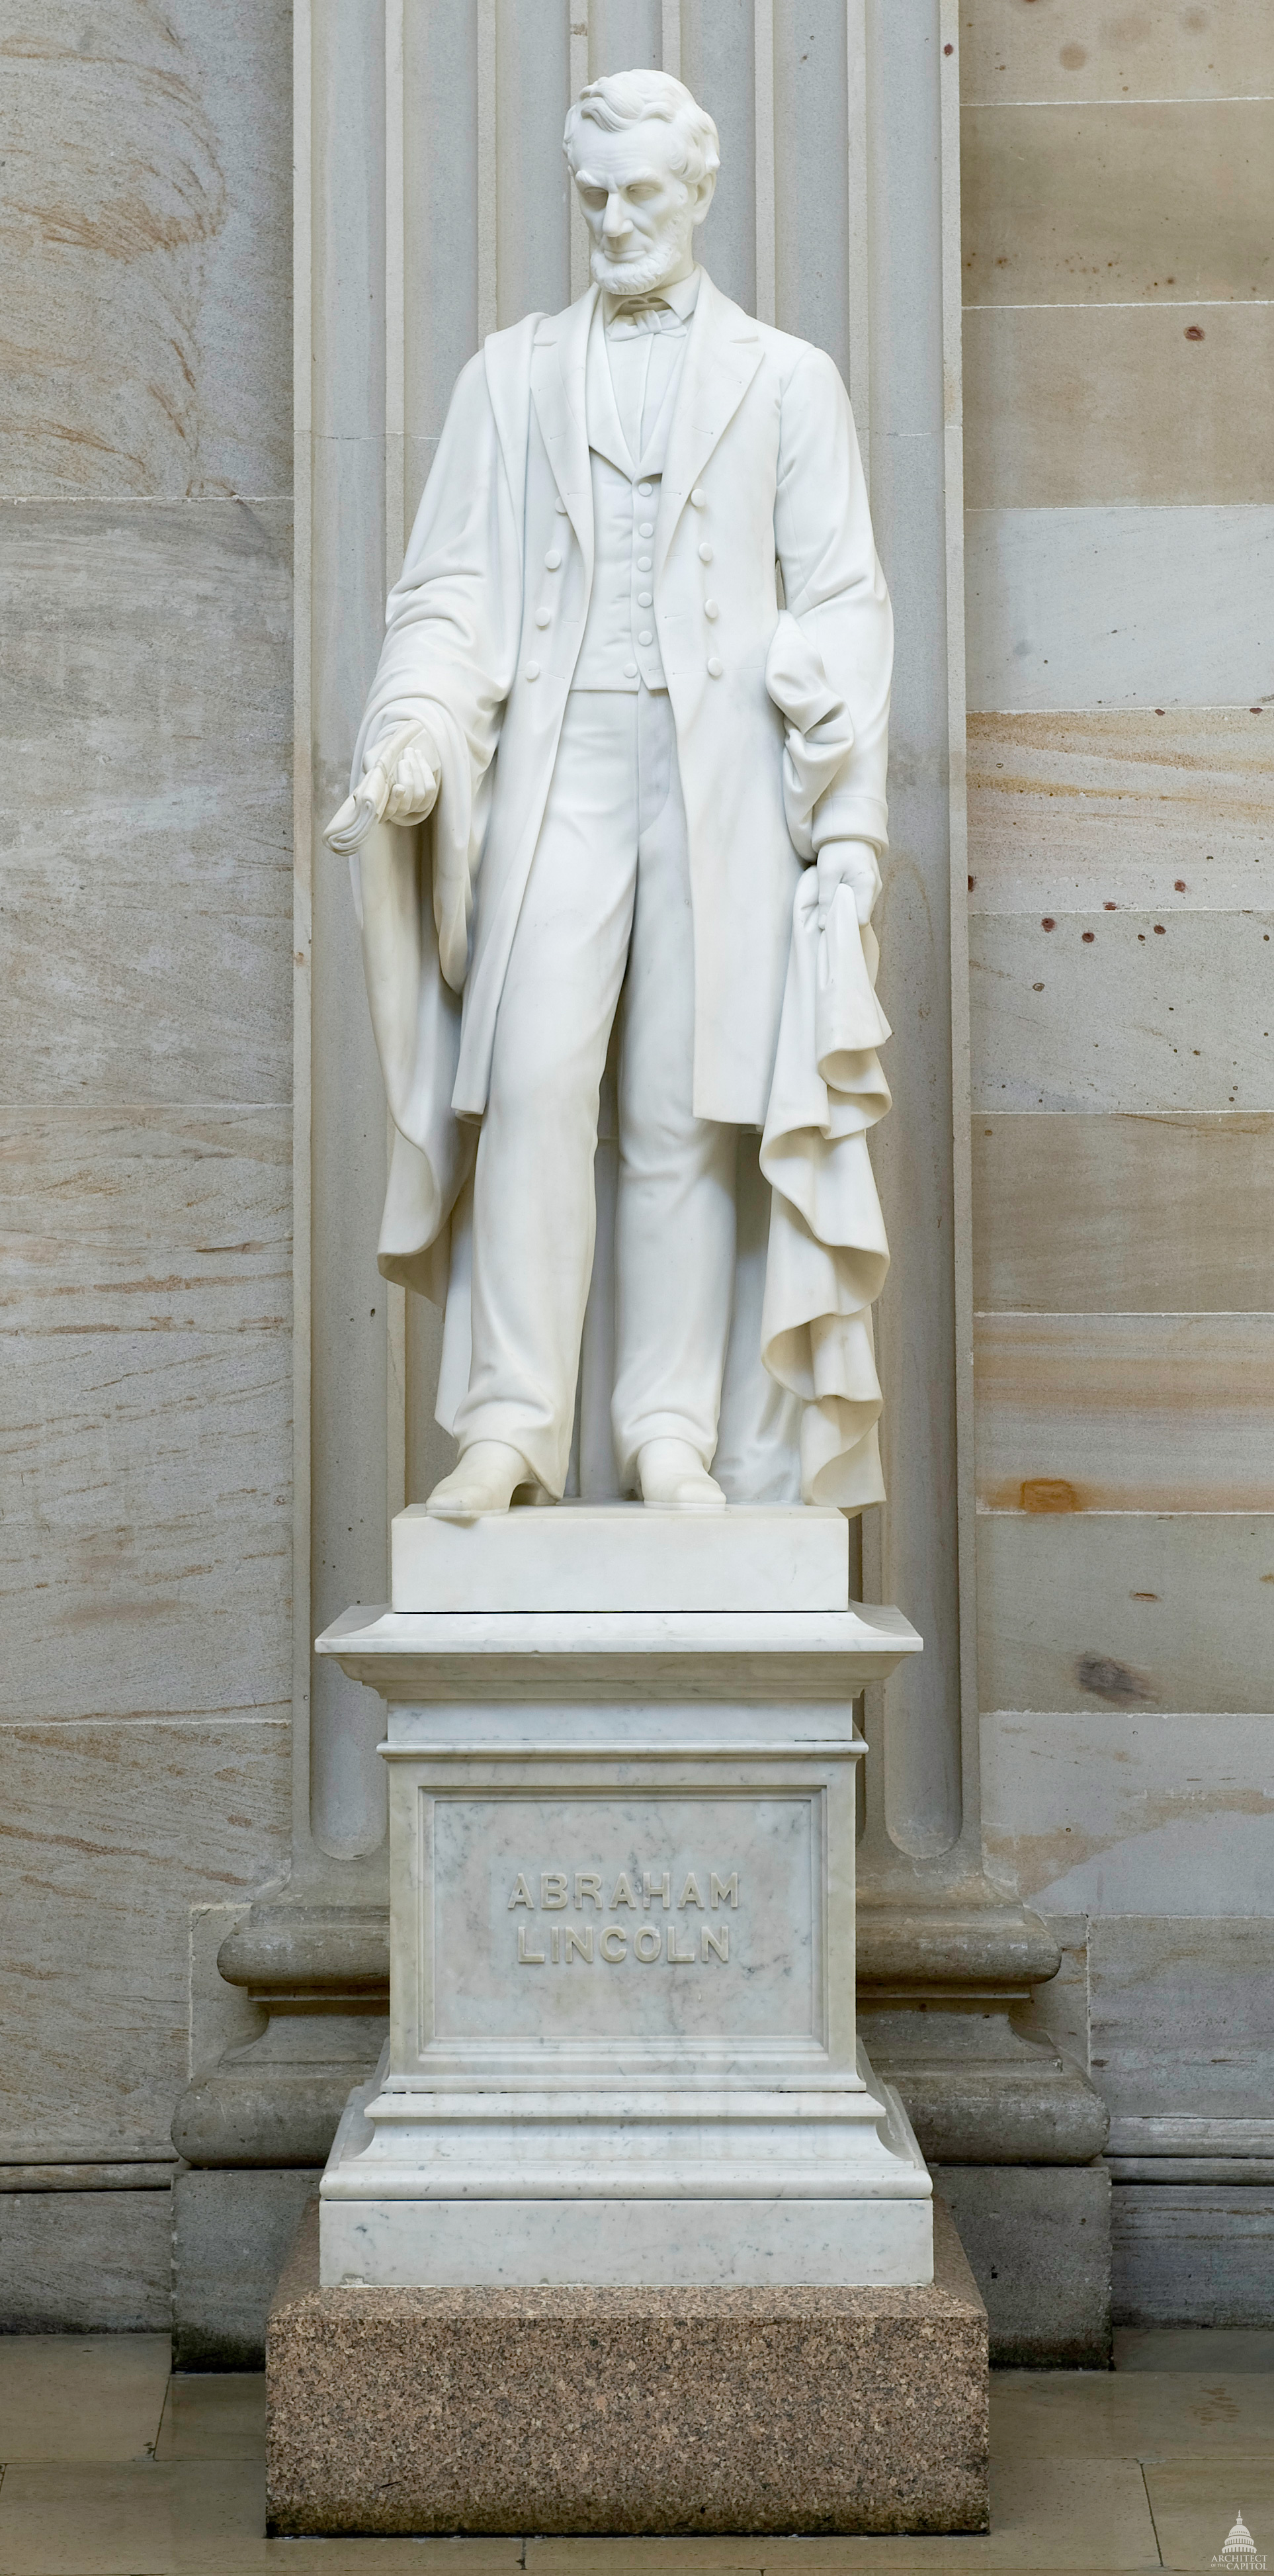 Abraham Lincoln Statue | Architect of the Capitol | United States ...